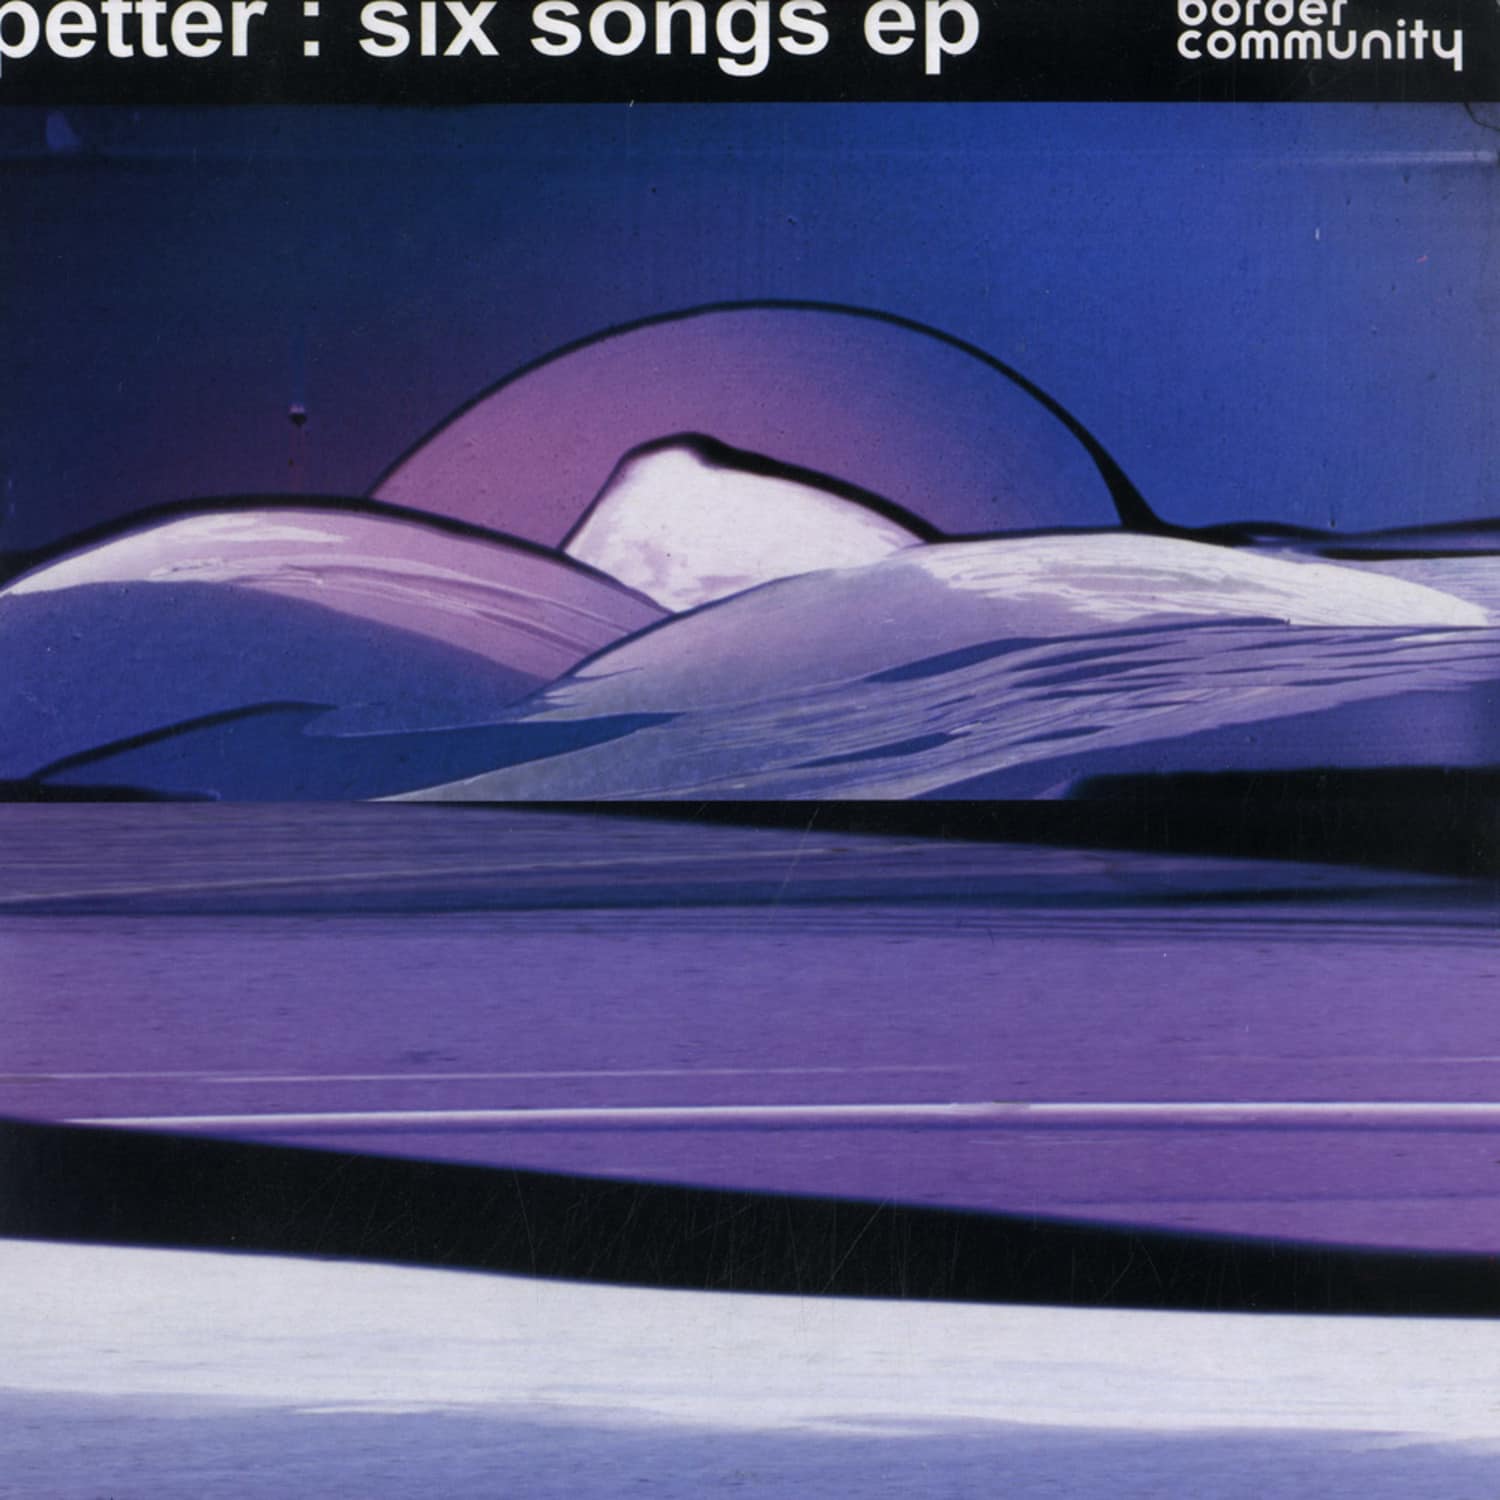 Petter - SIX SONG ep 